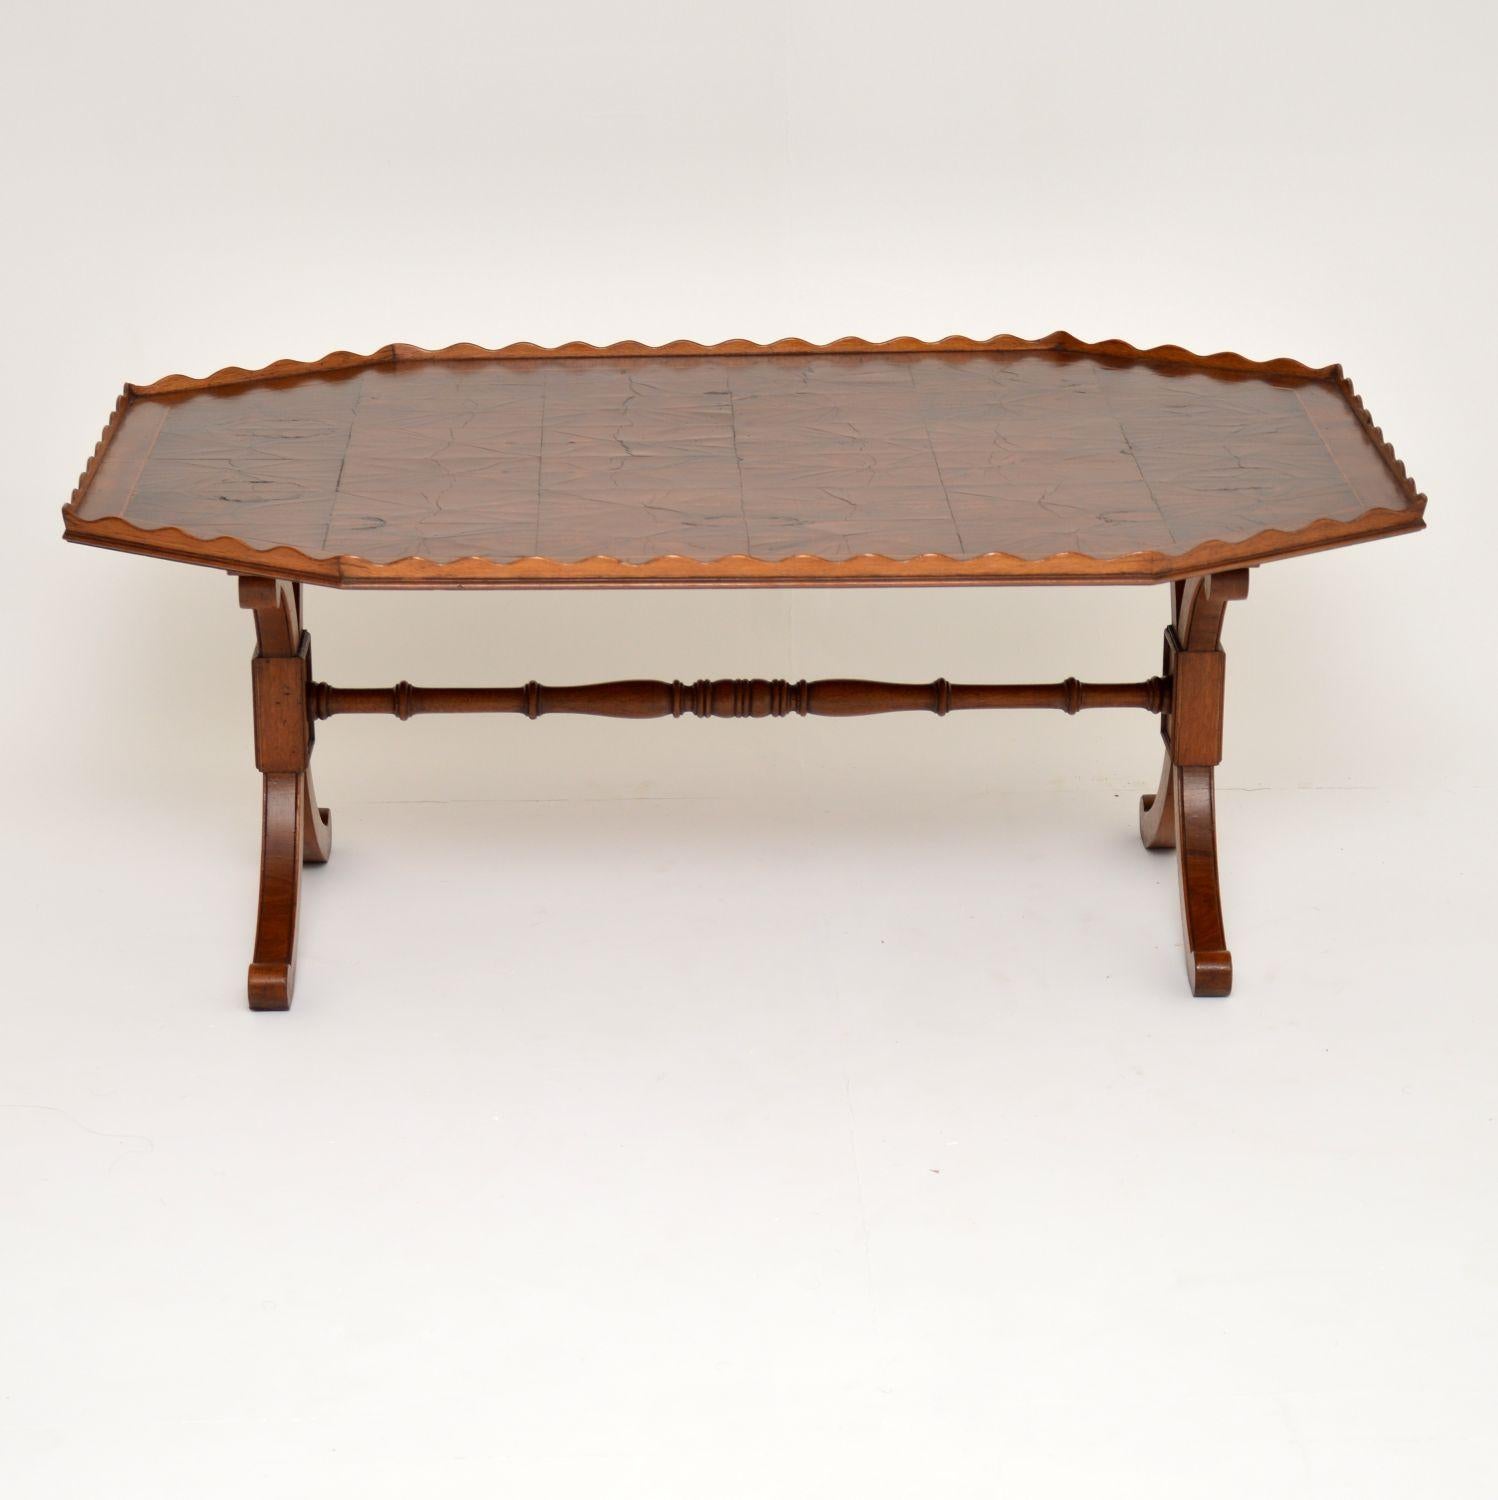 Antique yew wood and oyster veneer coffee table in good original condition & with loads of character. The top has a pie crust raised edge & there are many sections of oyster wood panels surrounded by yew wood crossbanding. It sits on ‘X’ framed legs